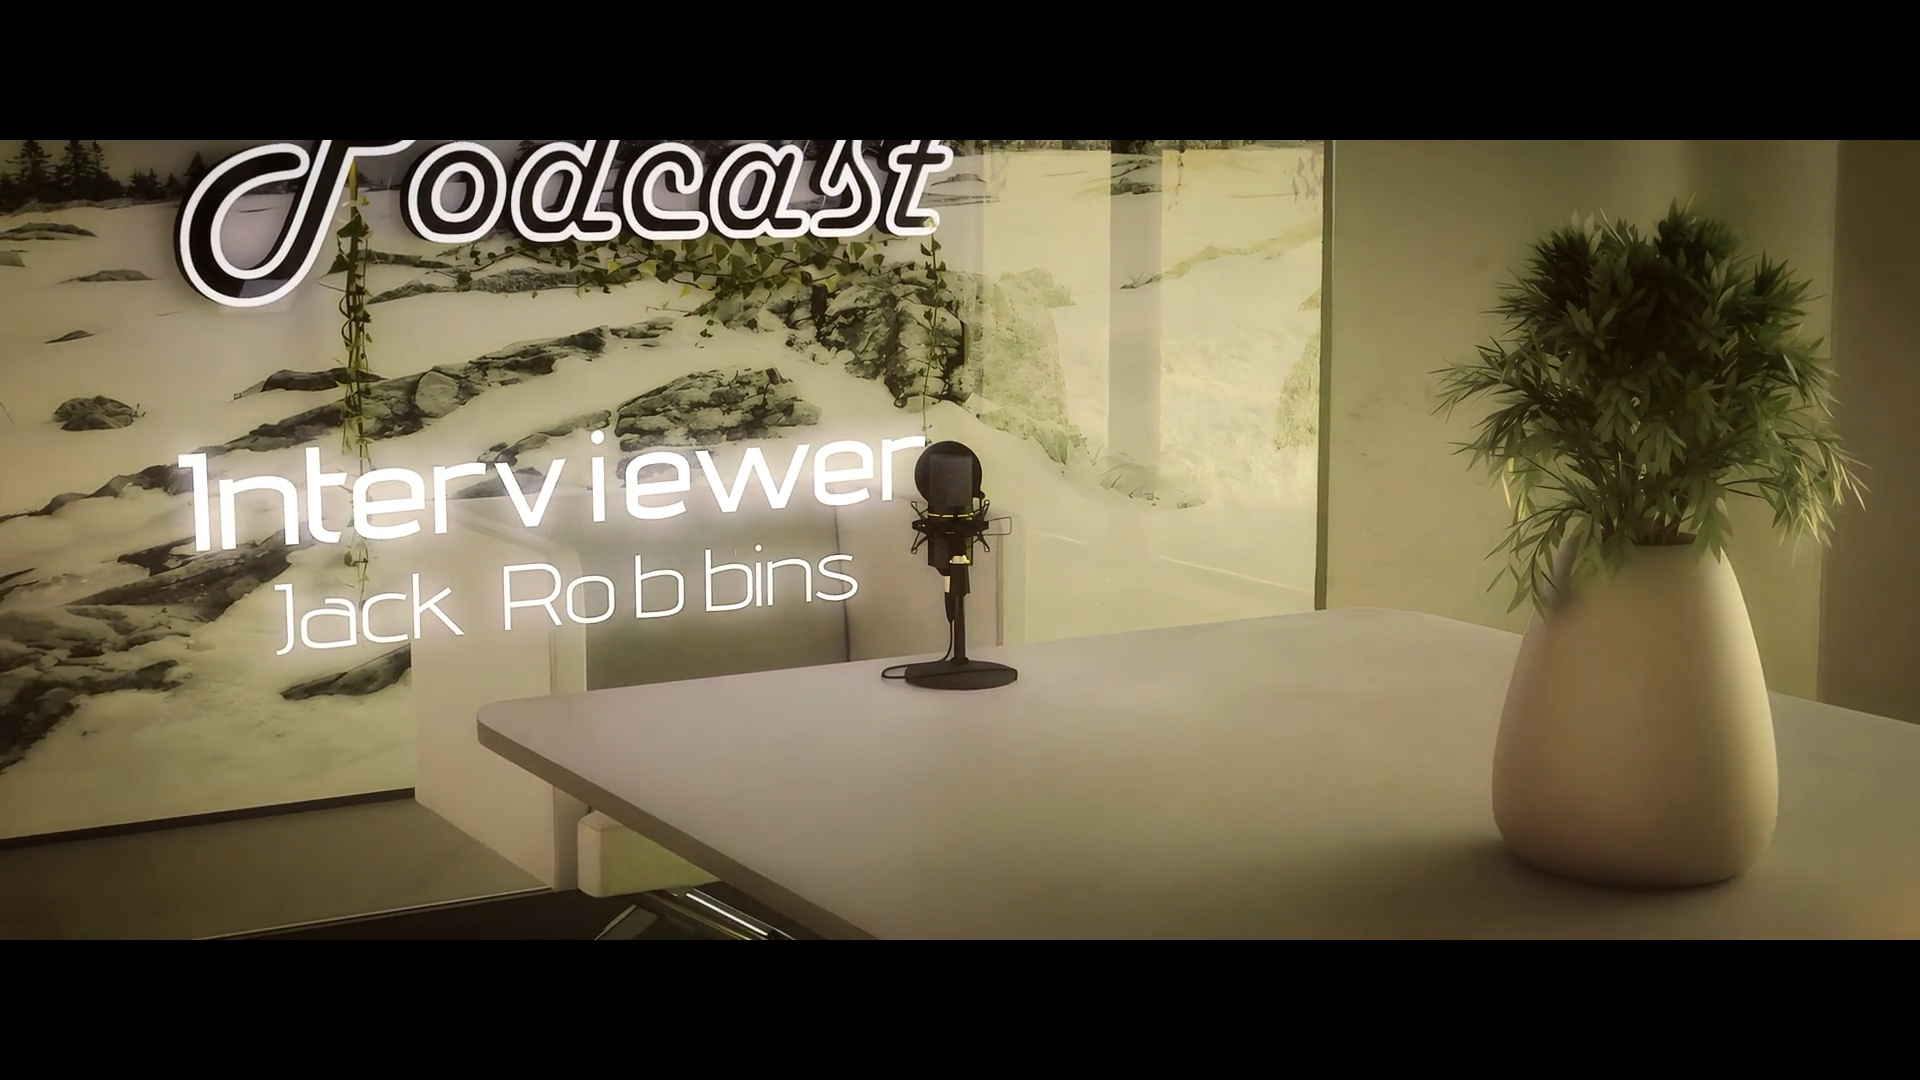 3D Podcast Opener 51405067 Videohive - Free Download After Effects Template